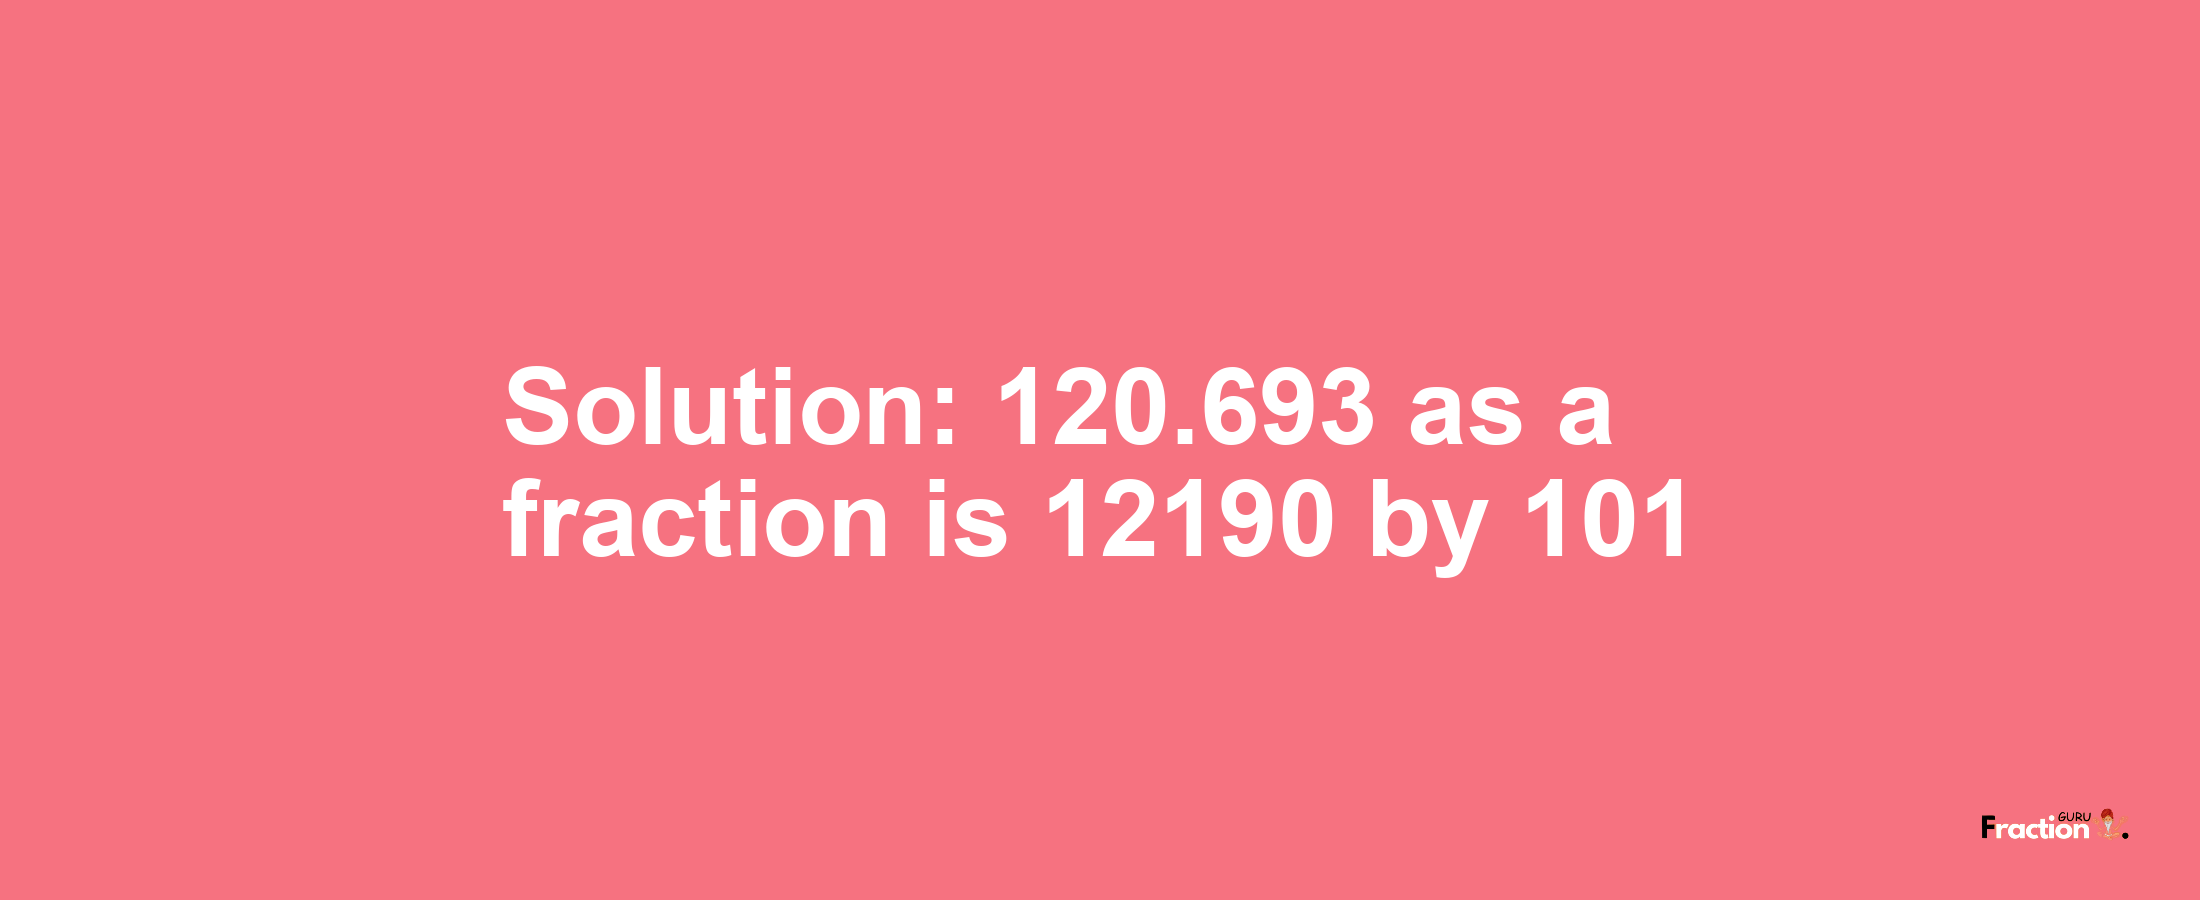 Solution:120.693 as a fraction is 12190/101